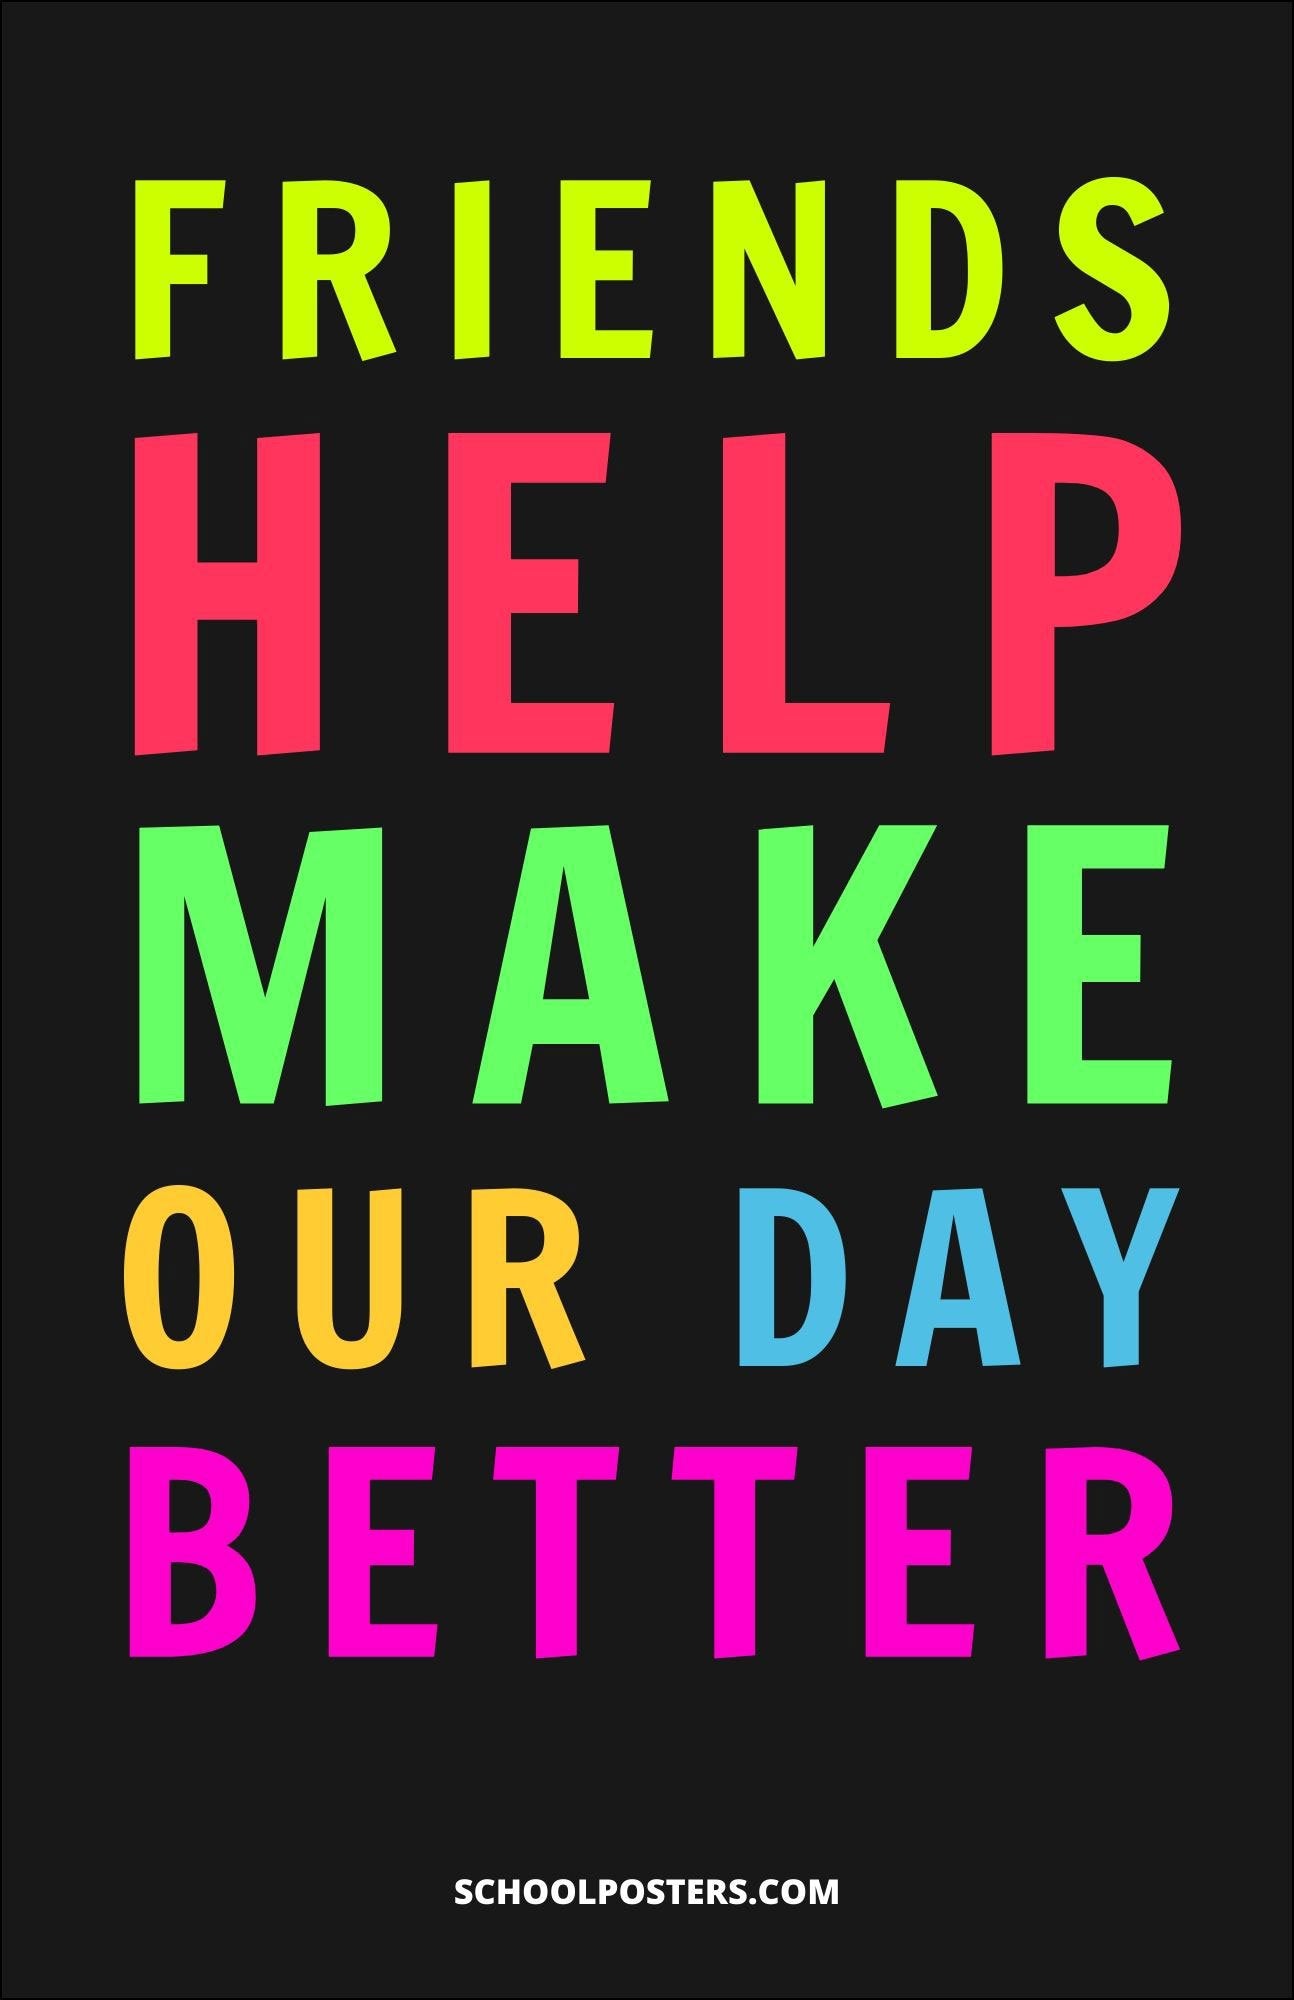 Friends Help Make Our Day Better Poster